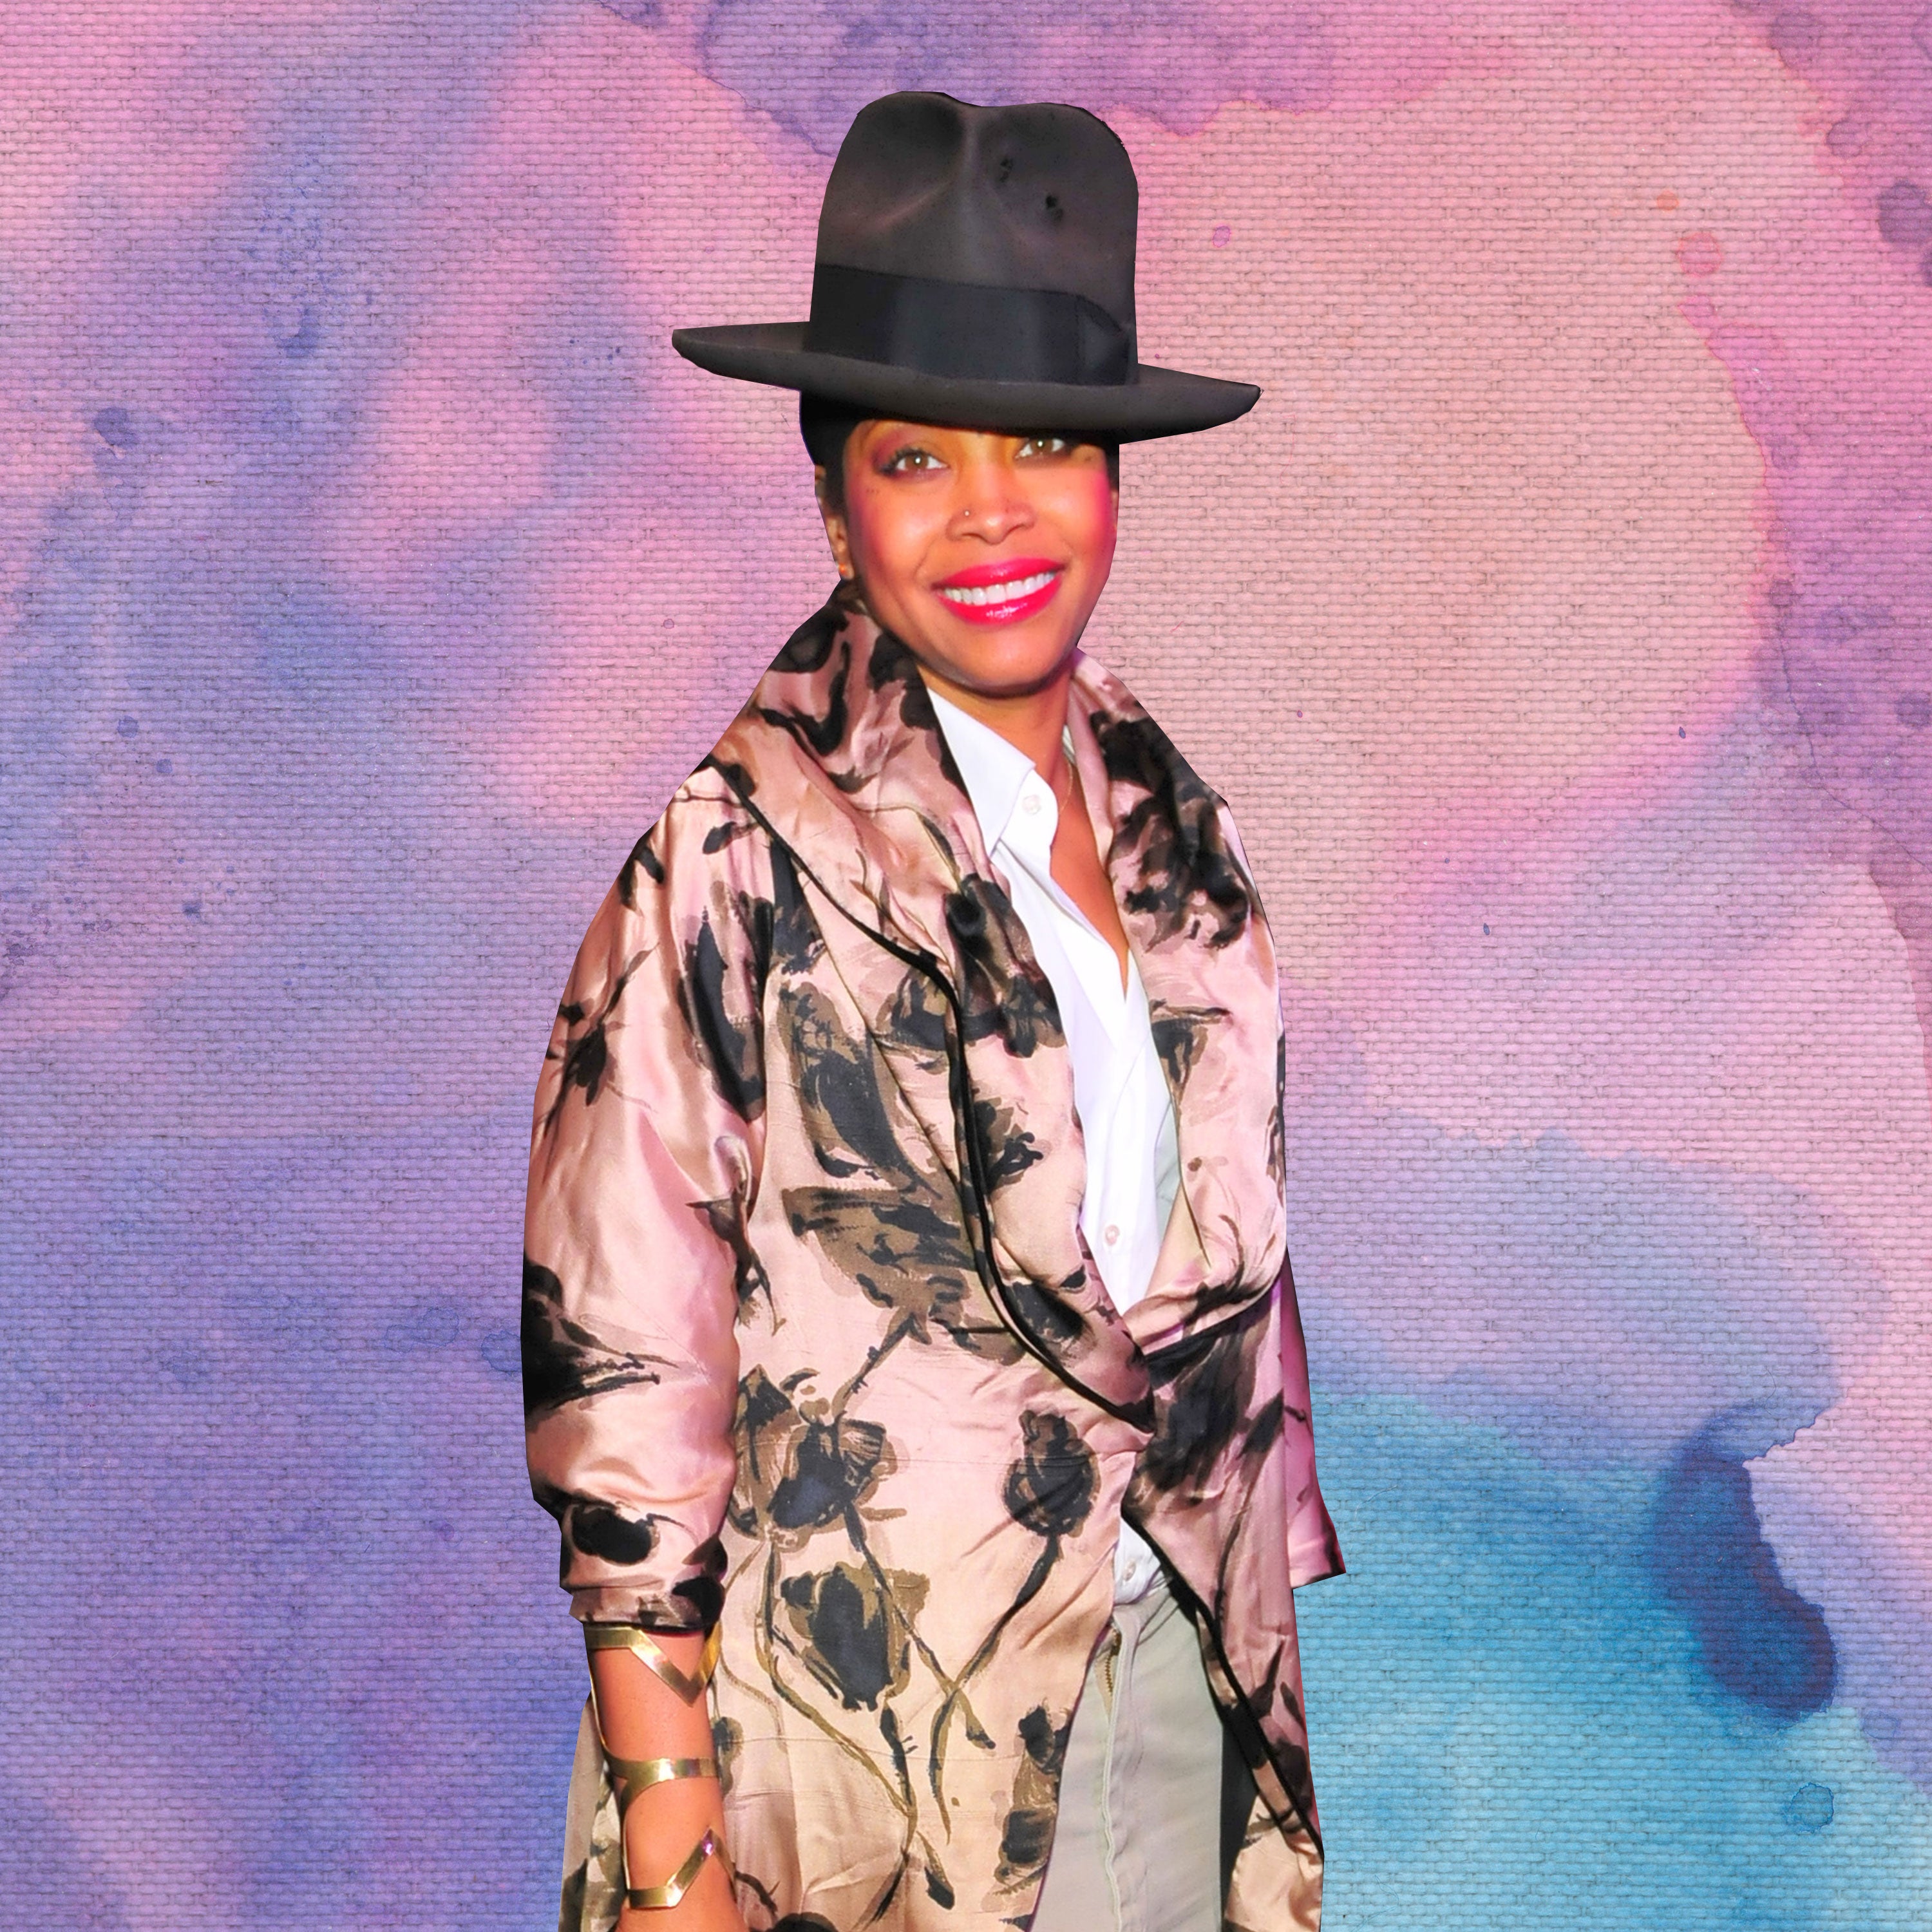 Watch Erykah Badu Perform 'On & On' At An Open Mic Before She Was Famous
